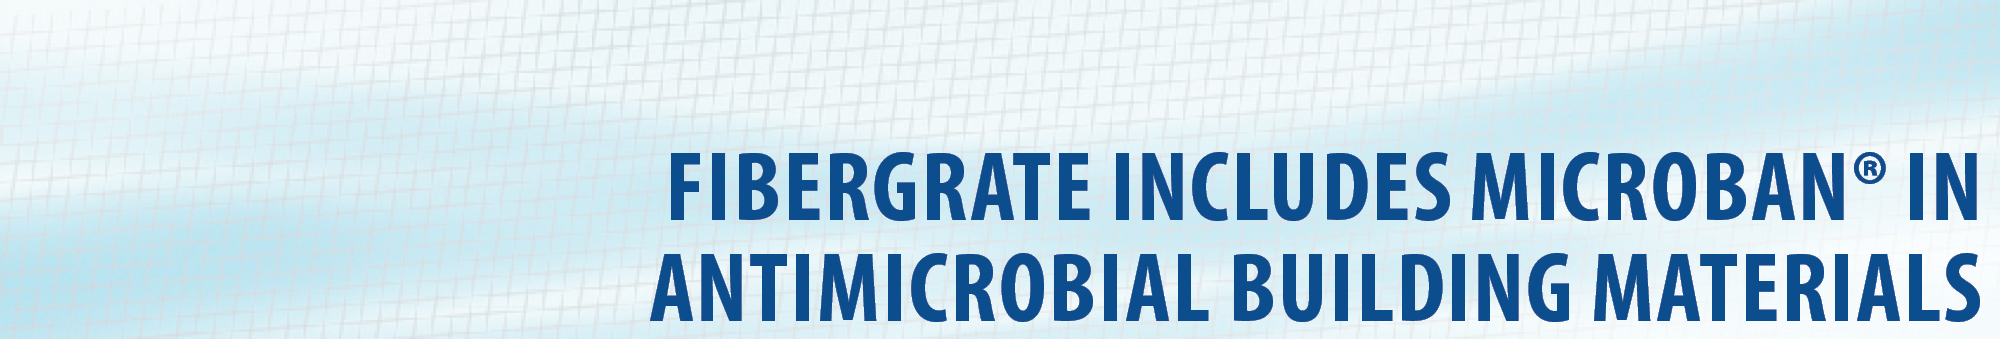 Fibergrate Includes Microban® in Antimicrobial Building Materials for Added Product Protection